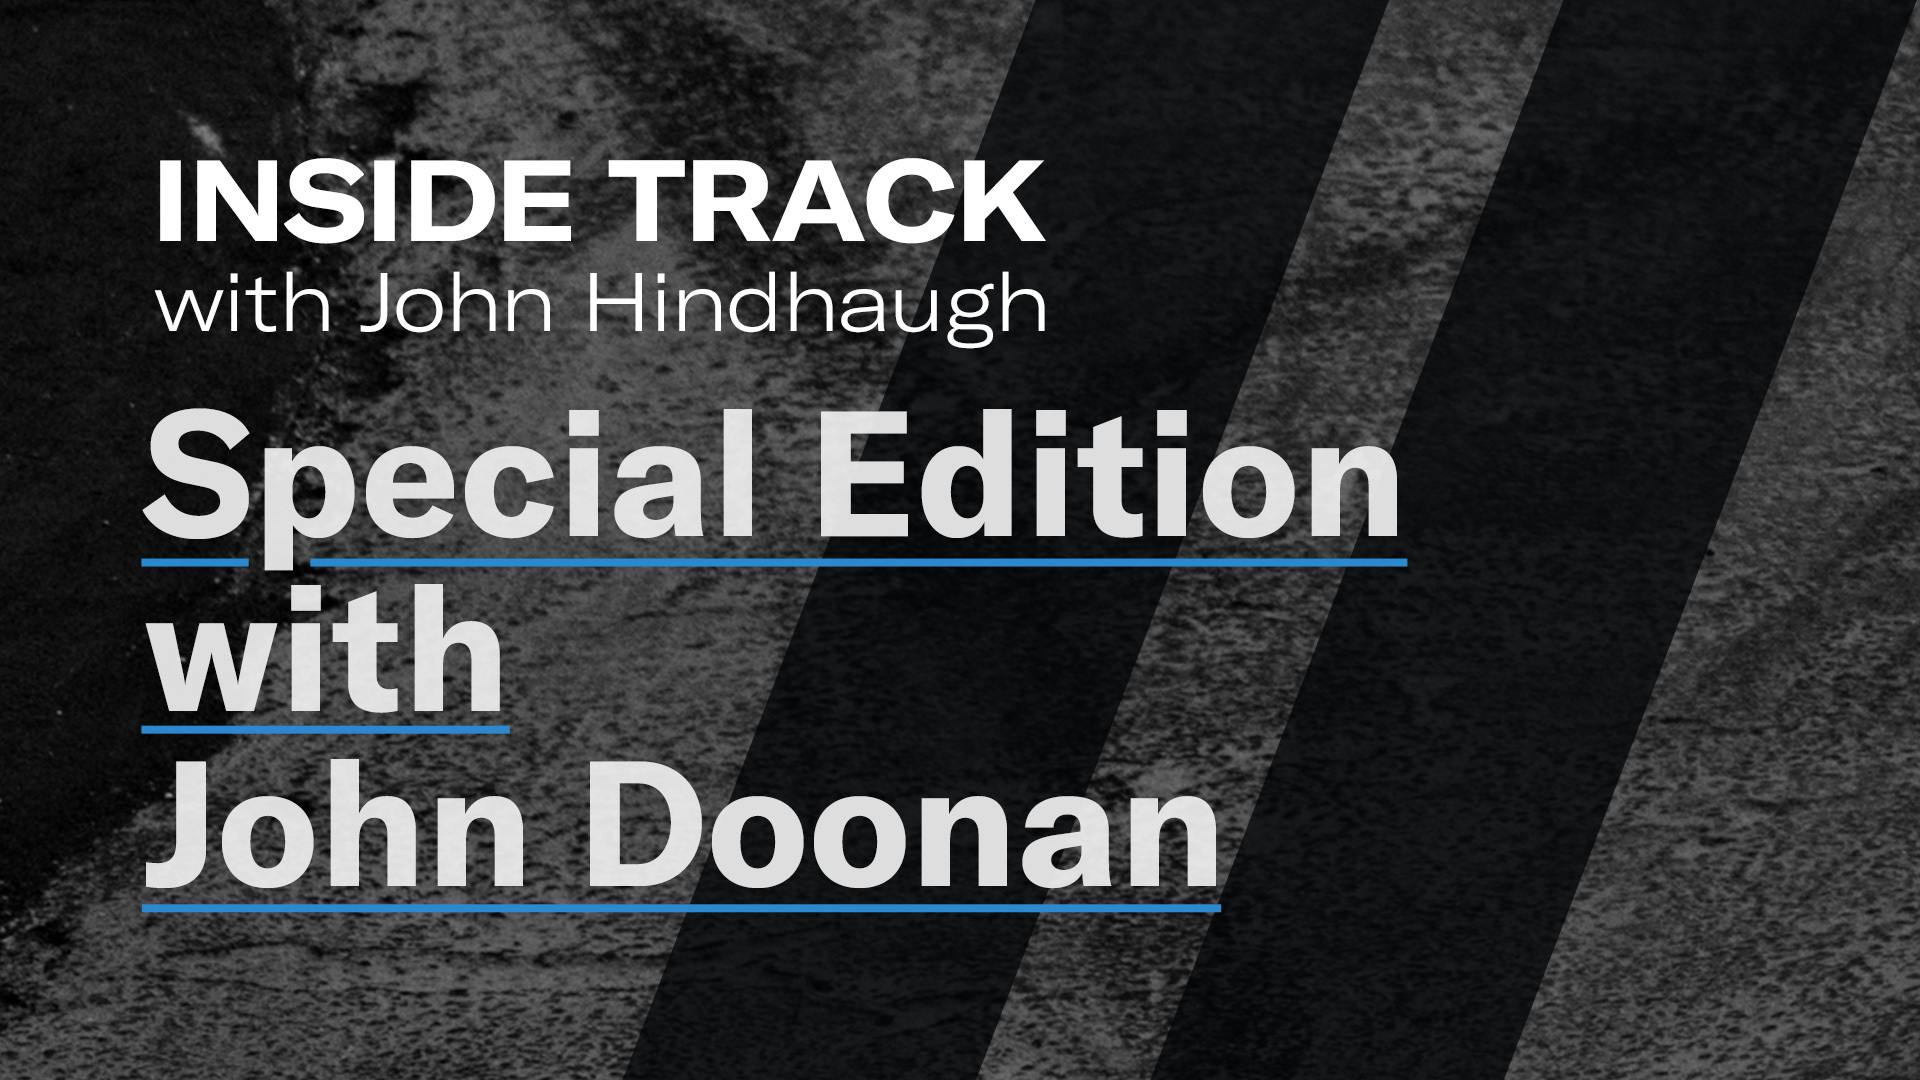 Special Edition with John Doonan | Inside Track with John Hindhaugh